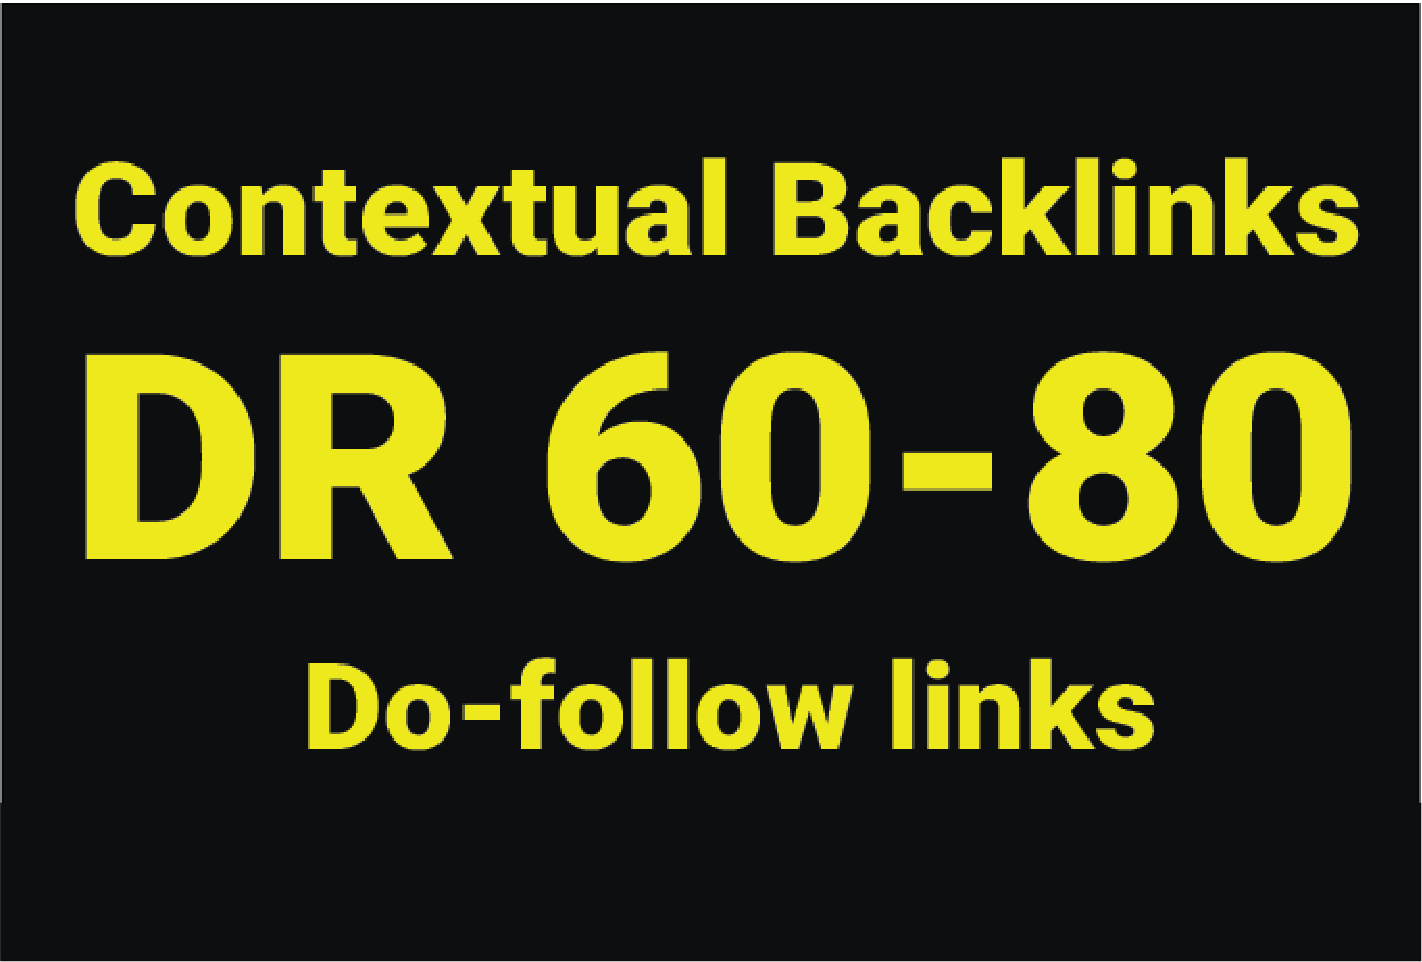 Create 25 DR 60 to 80 do follow backlinks for top ranking